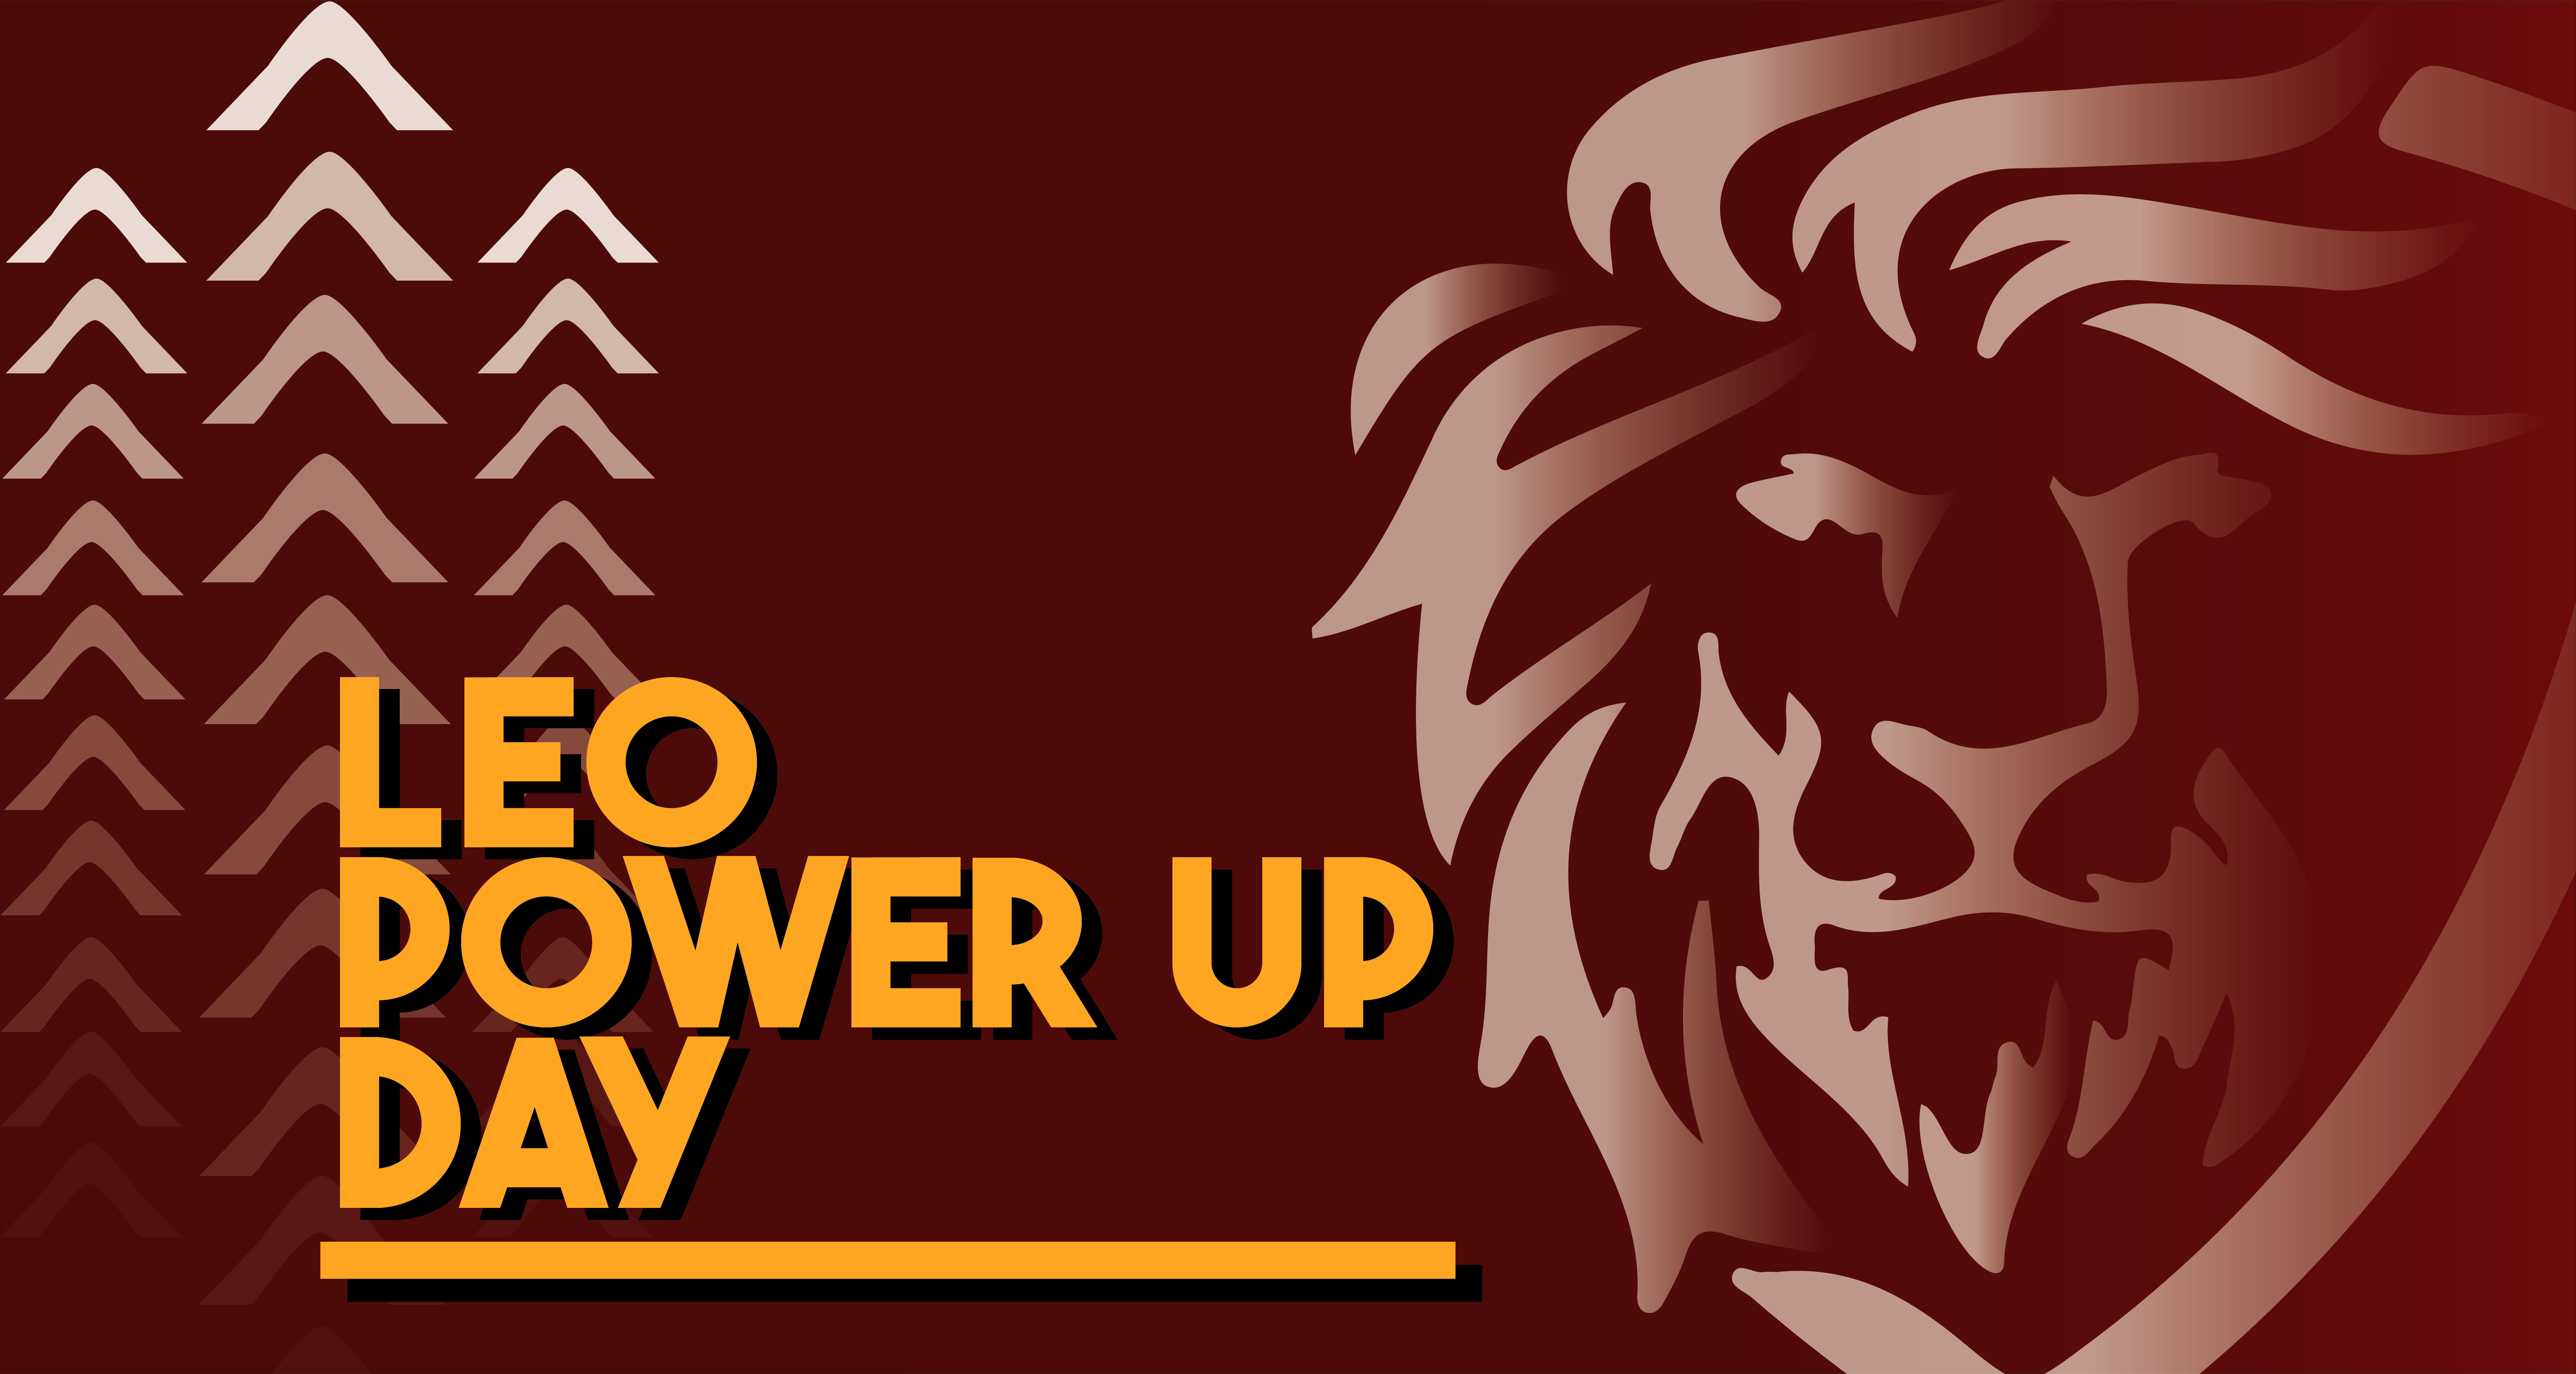 @leogrowth/lpud-is-here-power-up-and-get-a-delegation-as-big-as-your-power-up